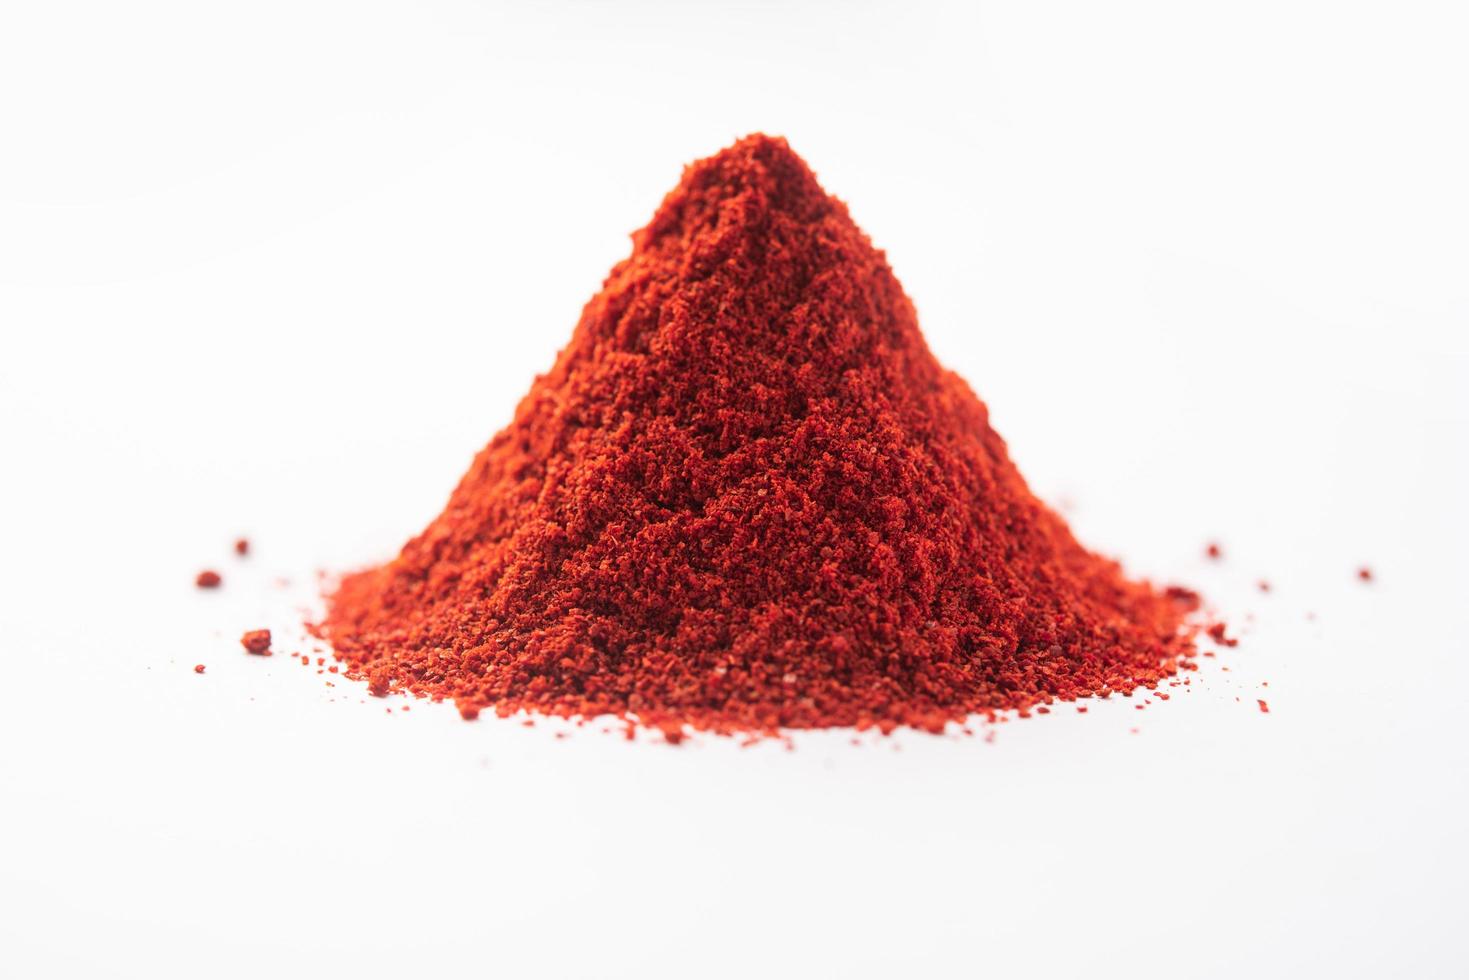 Red Chilli powder or lal mirch dust photo